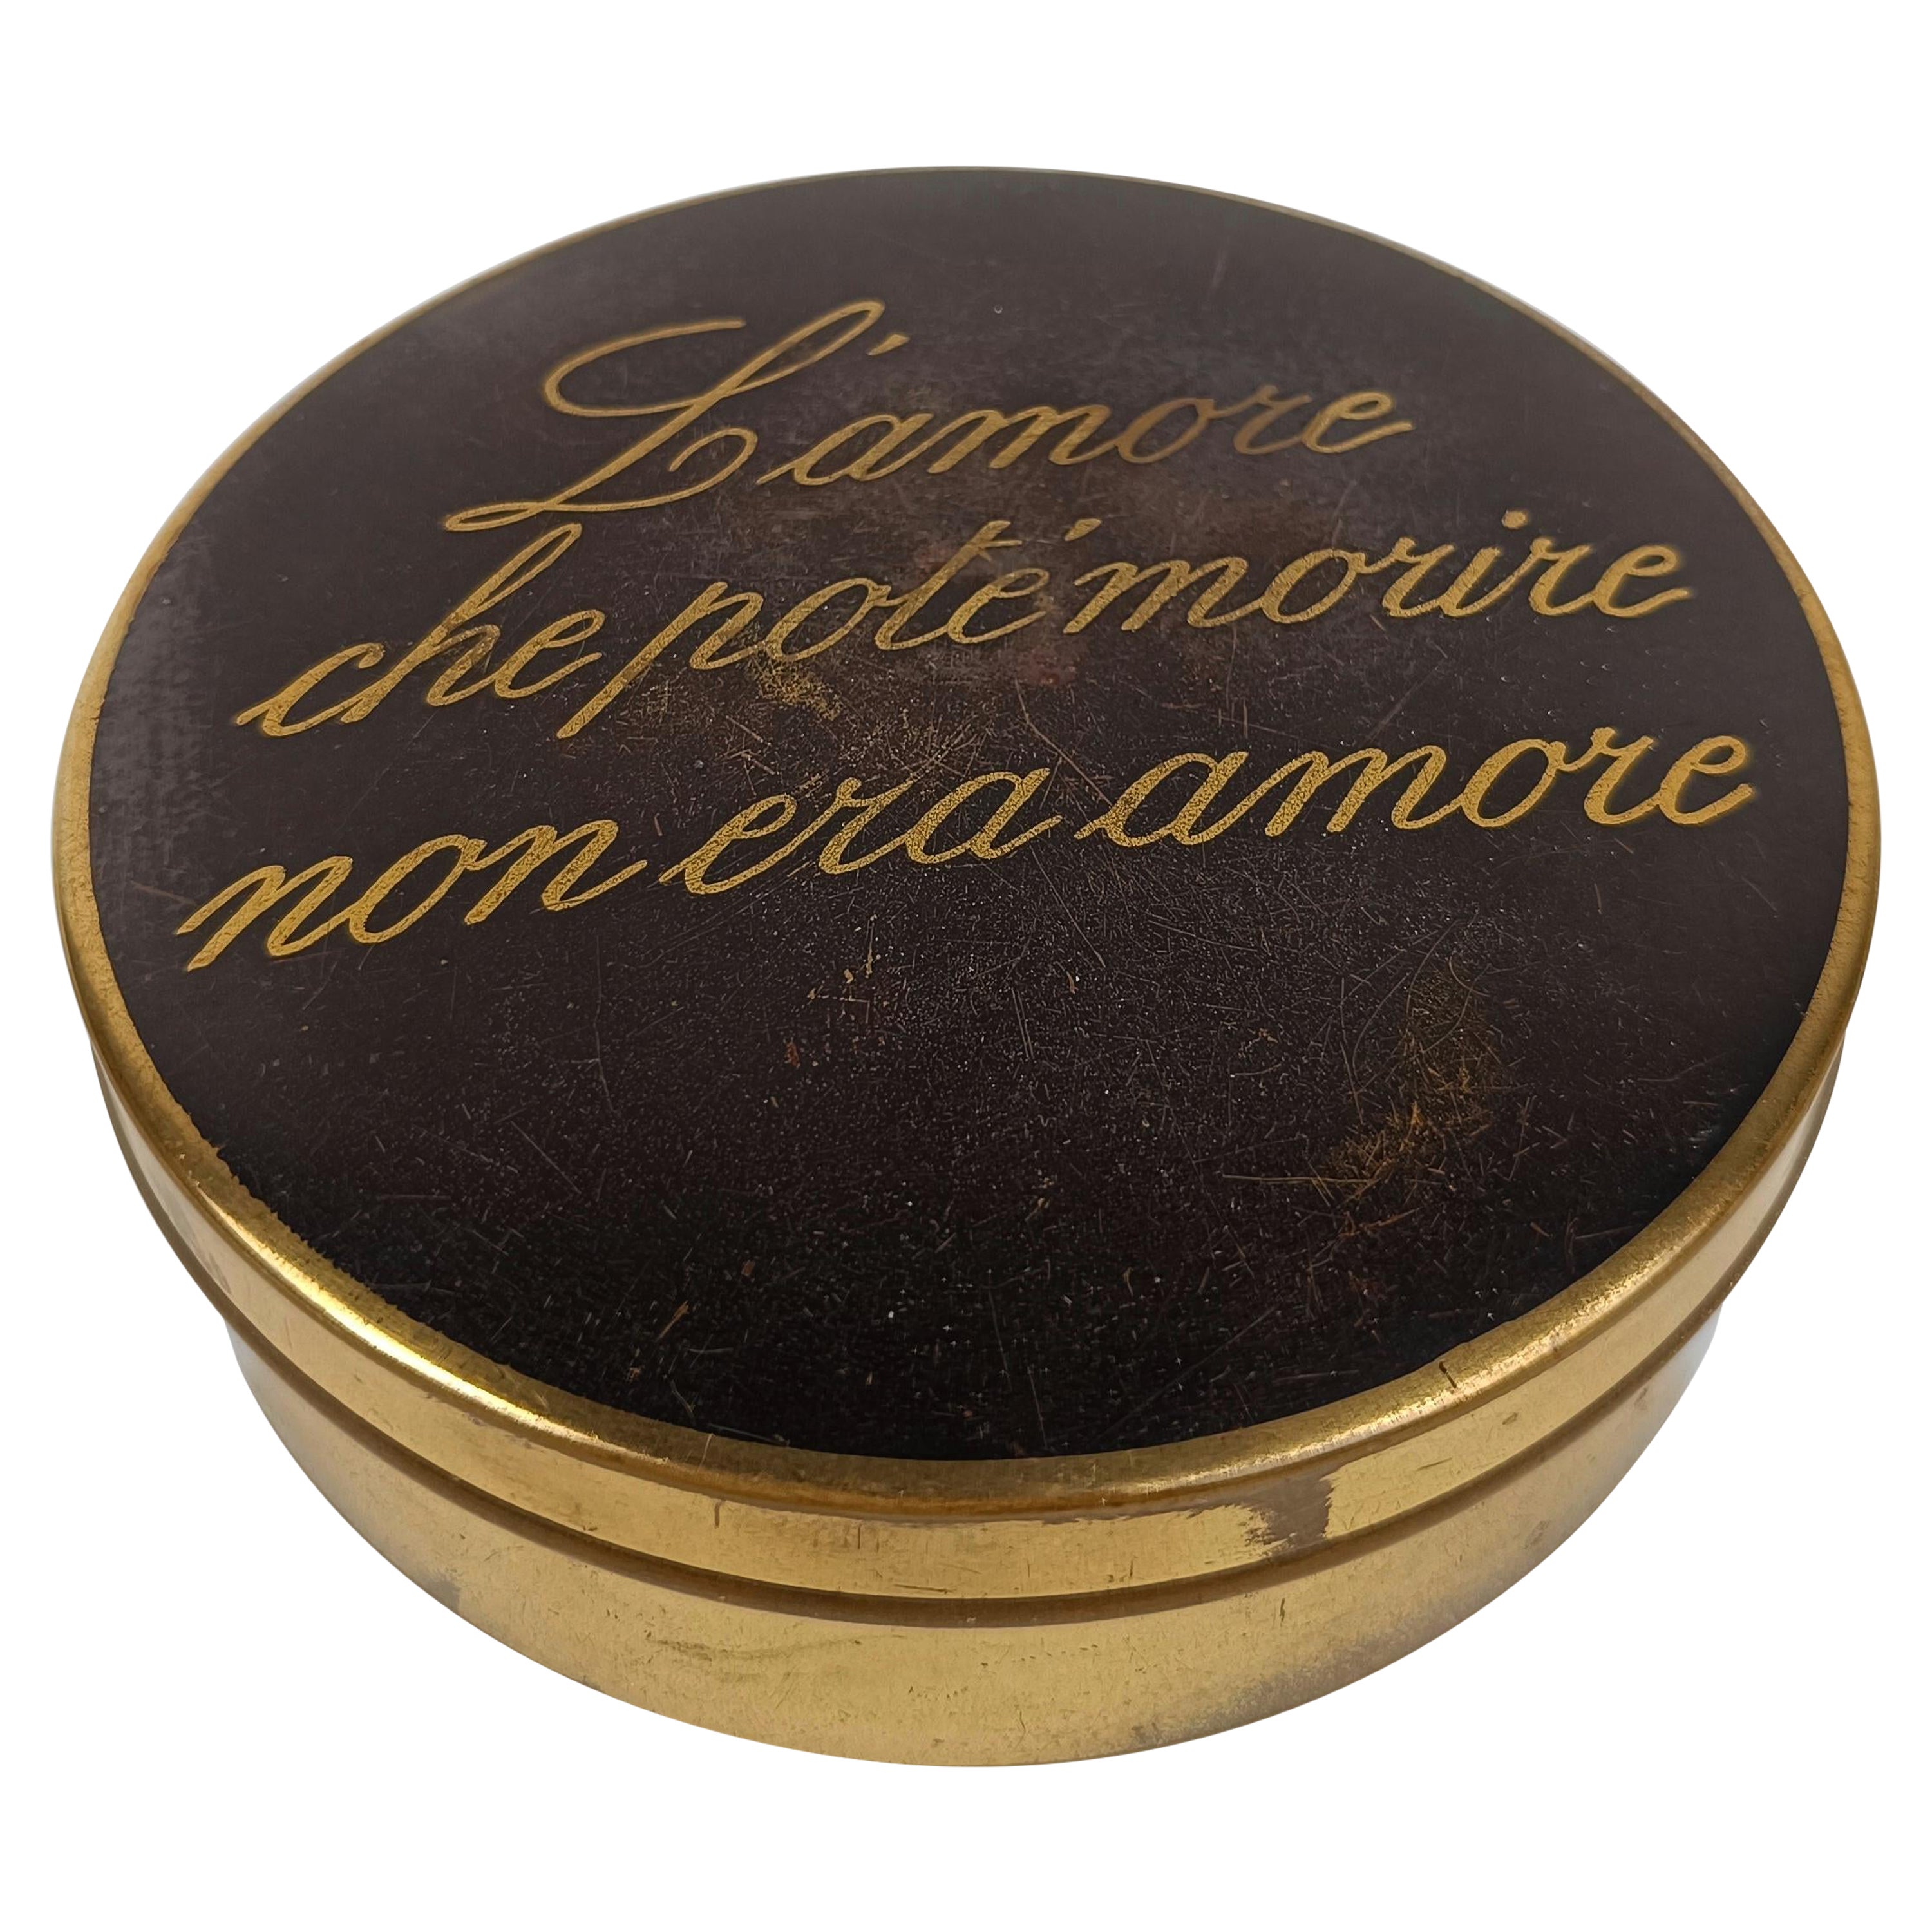 Italian Vintage Tin Box decorated with an aphorism about love of B. Auerbach